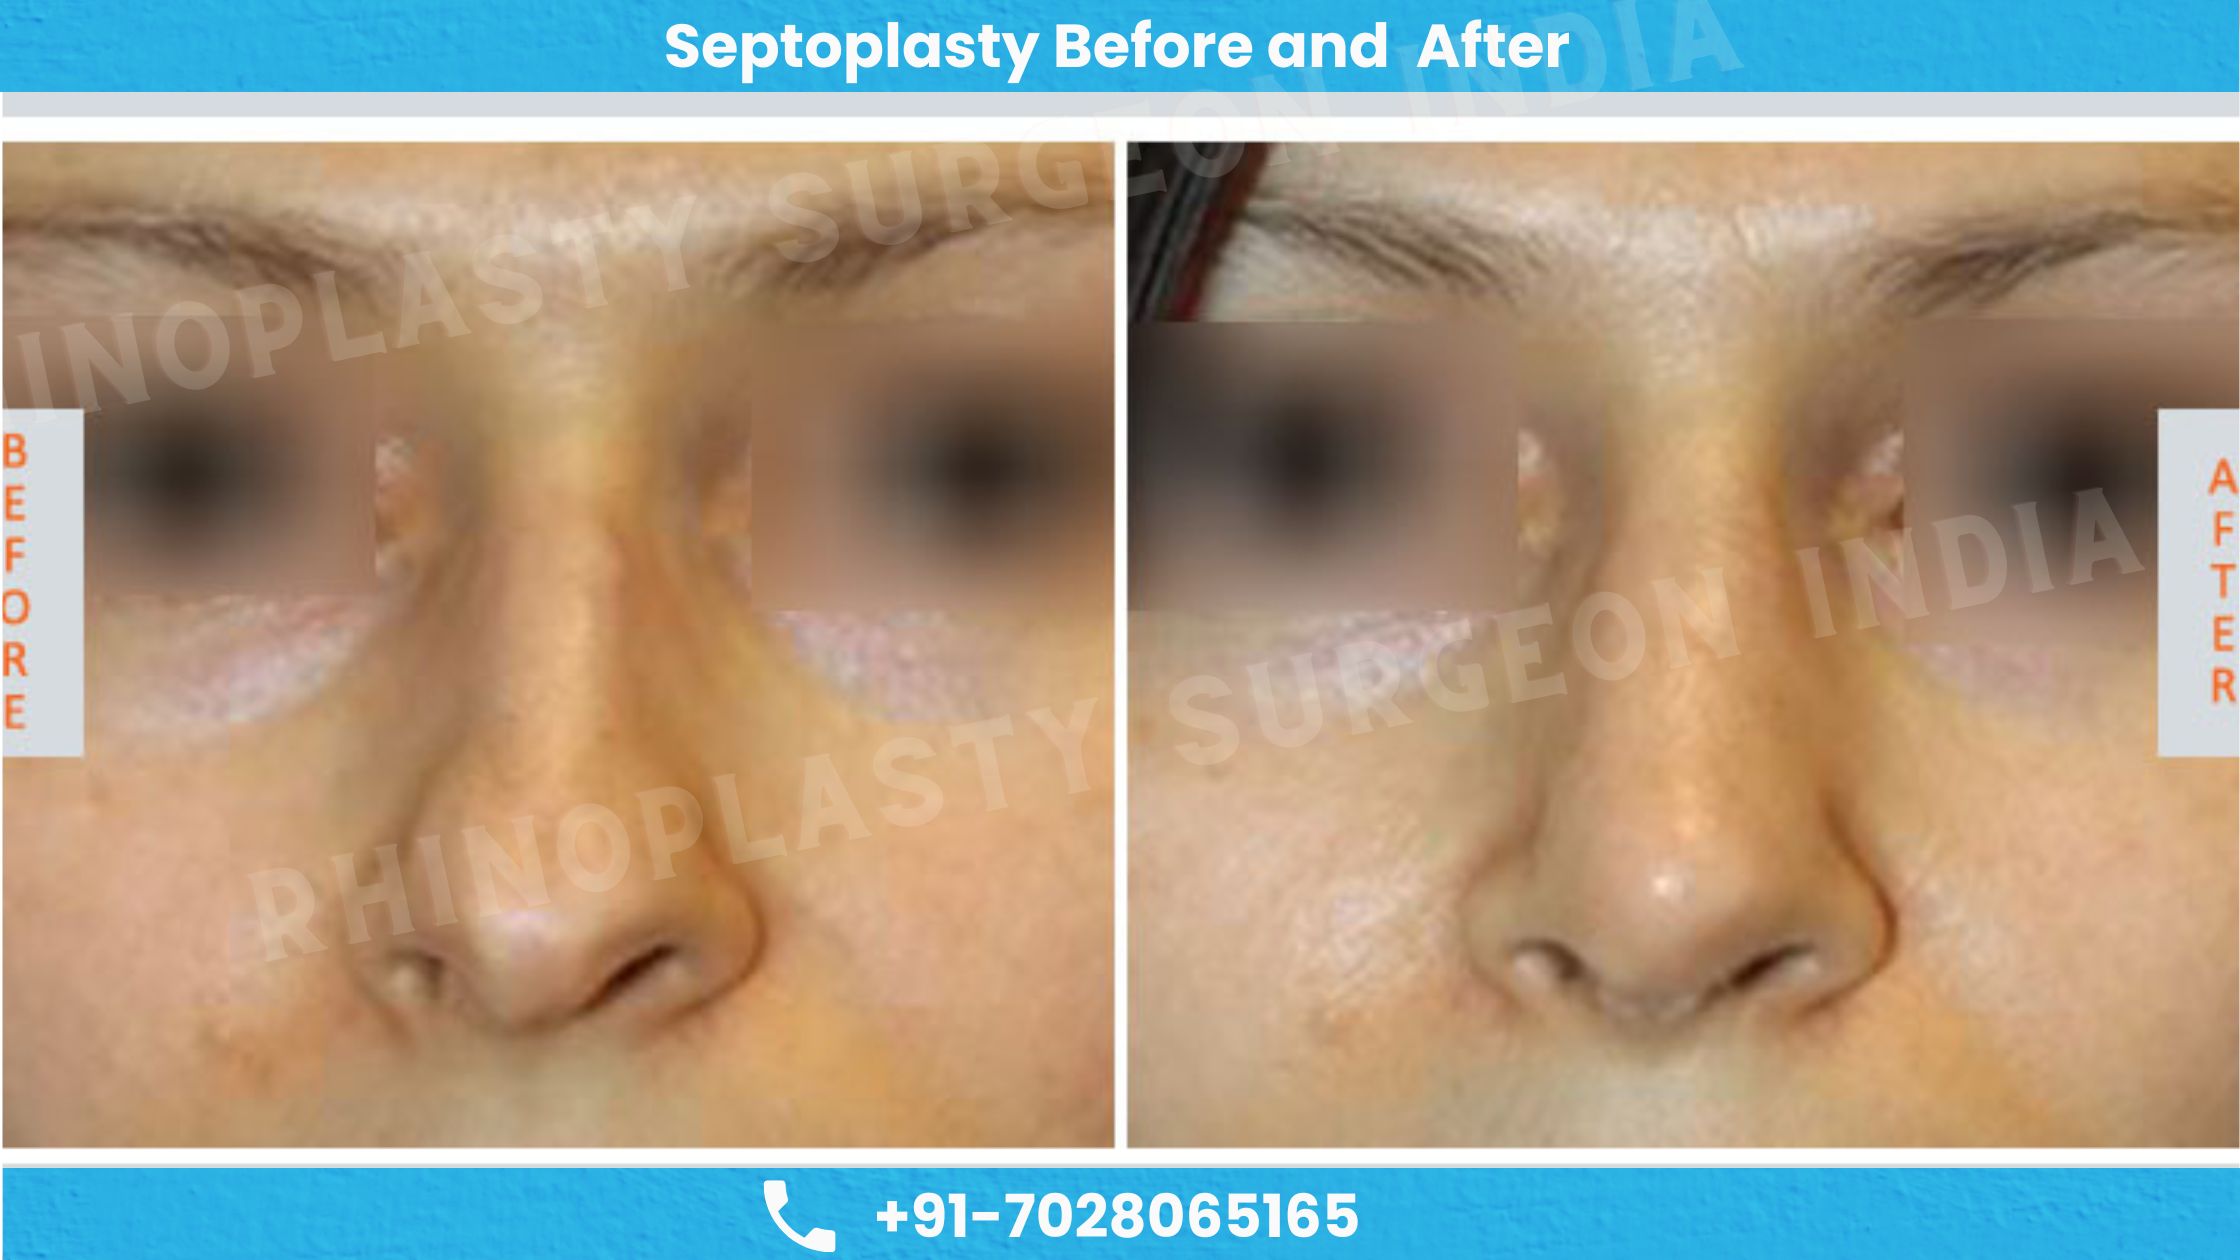 Before and after images of septoplasty surgery